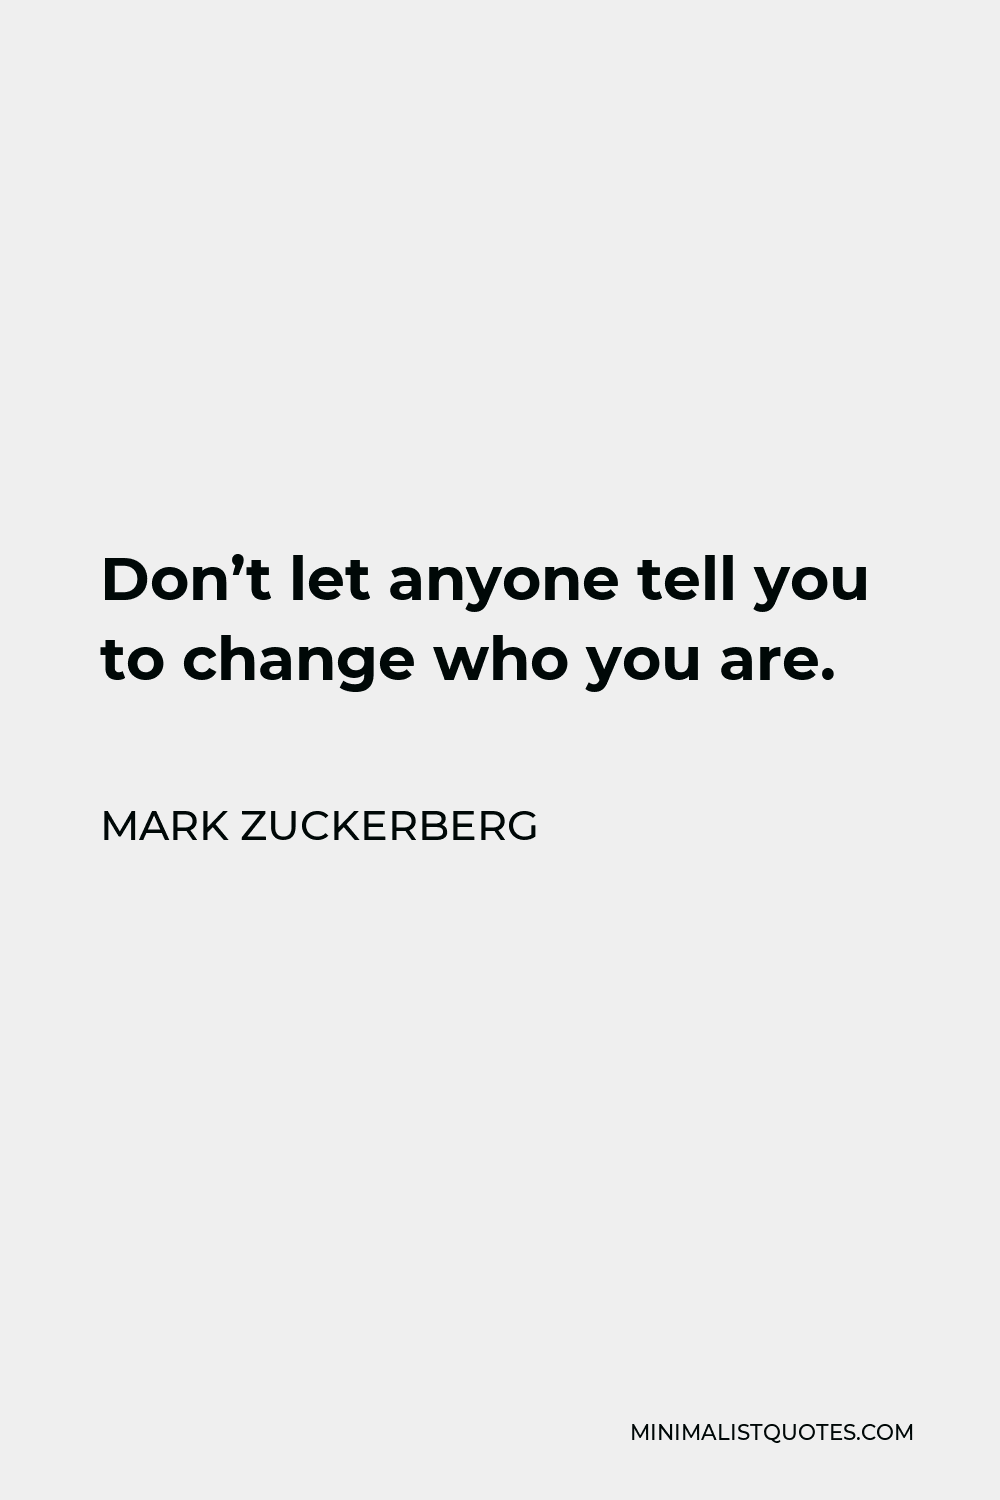 Mark Zuckerberg Quote - Don’t let anyone tell you to change who you are.